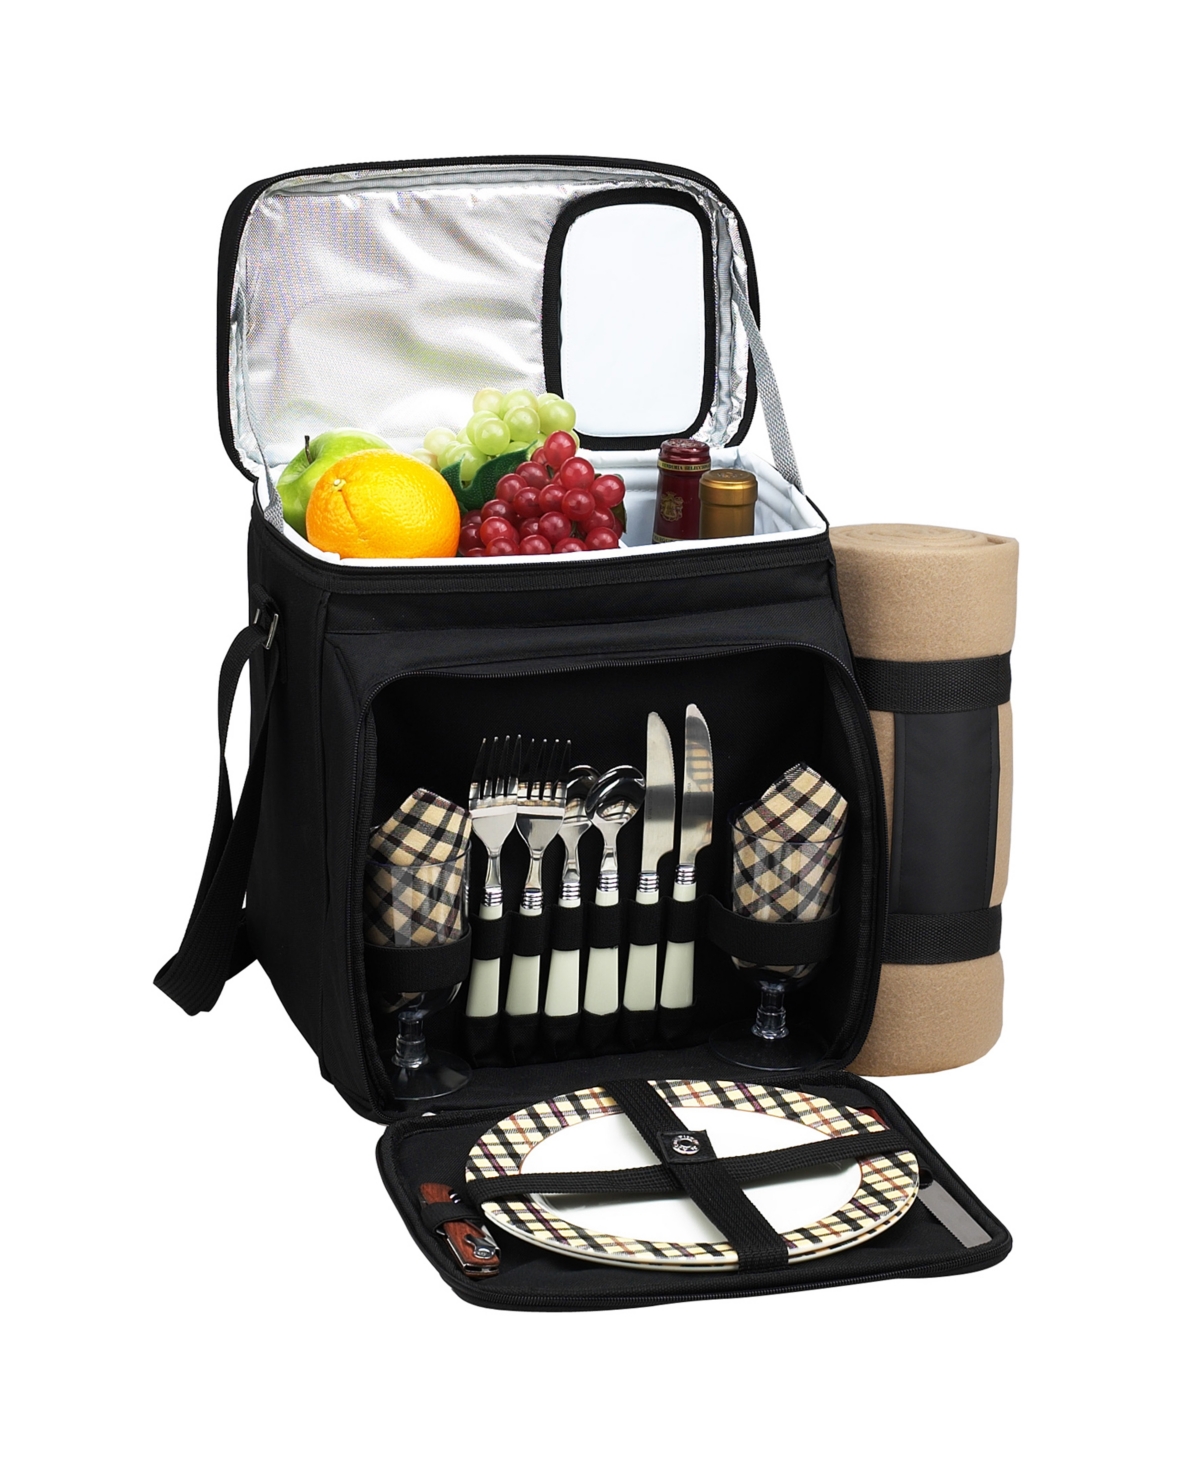 Insulated Picnic Basket, Cooler Fully Equipped for 2 with Blanket - Yellow